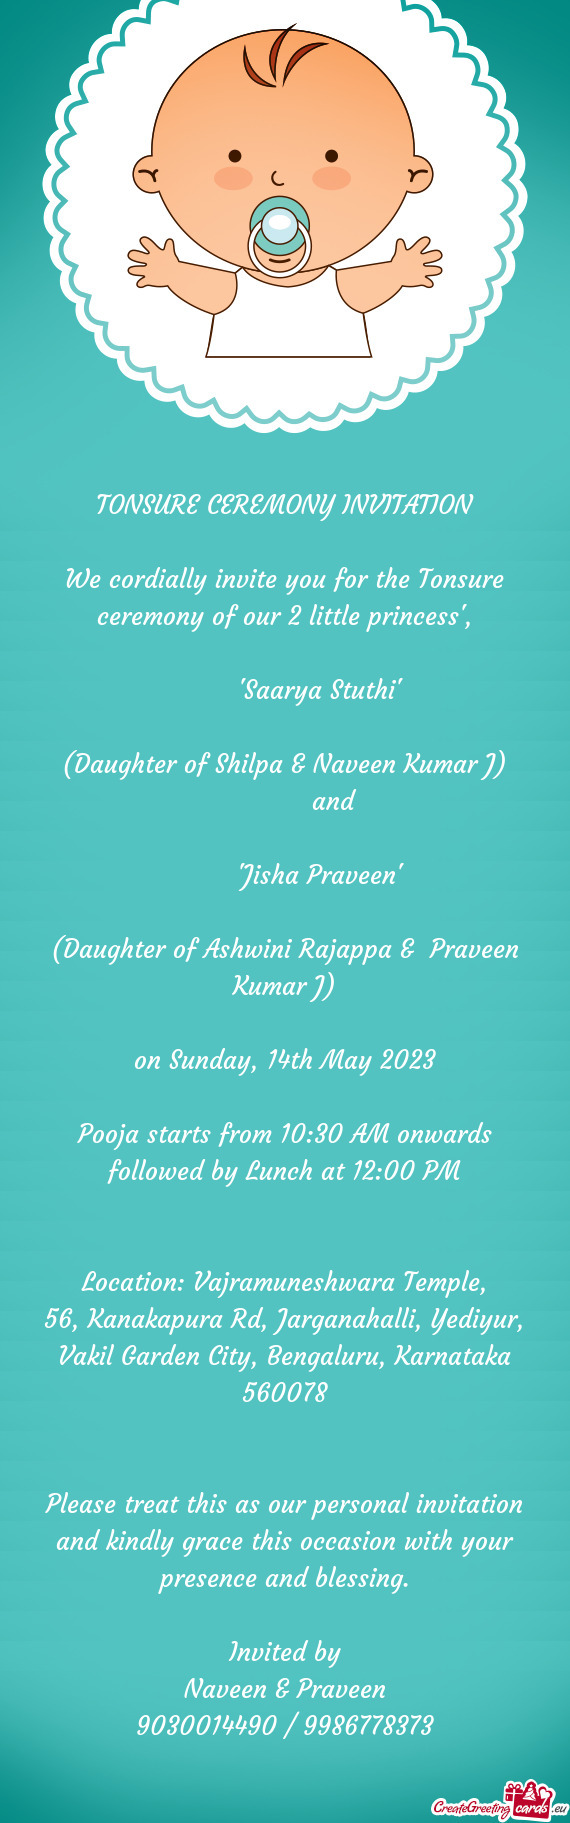 We cordially invite you for the Tonsure ceremony of our 2 little princess